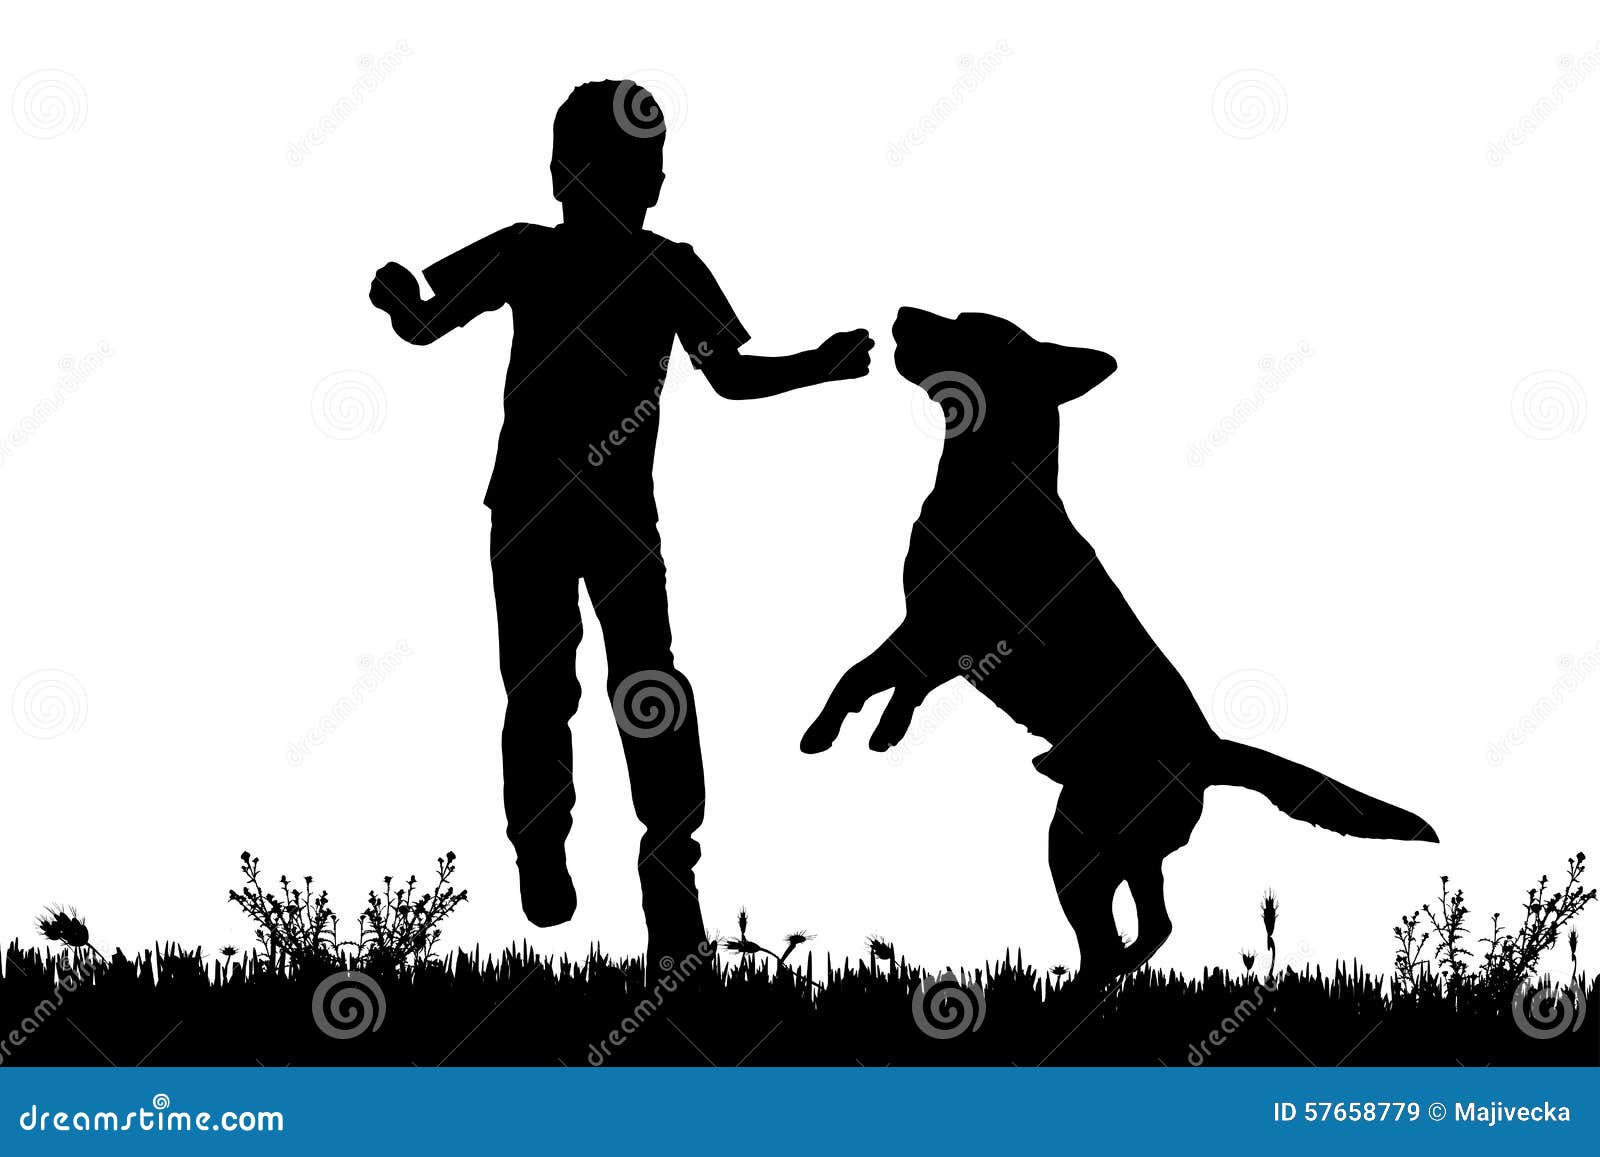 Vector Silhouette Of A Boy With A Dog. Stock Illustration